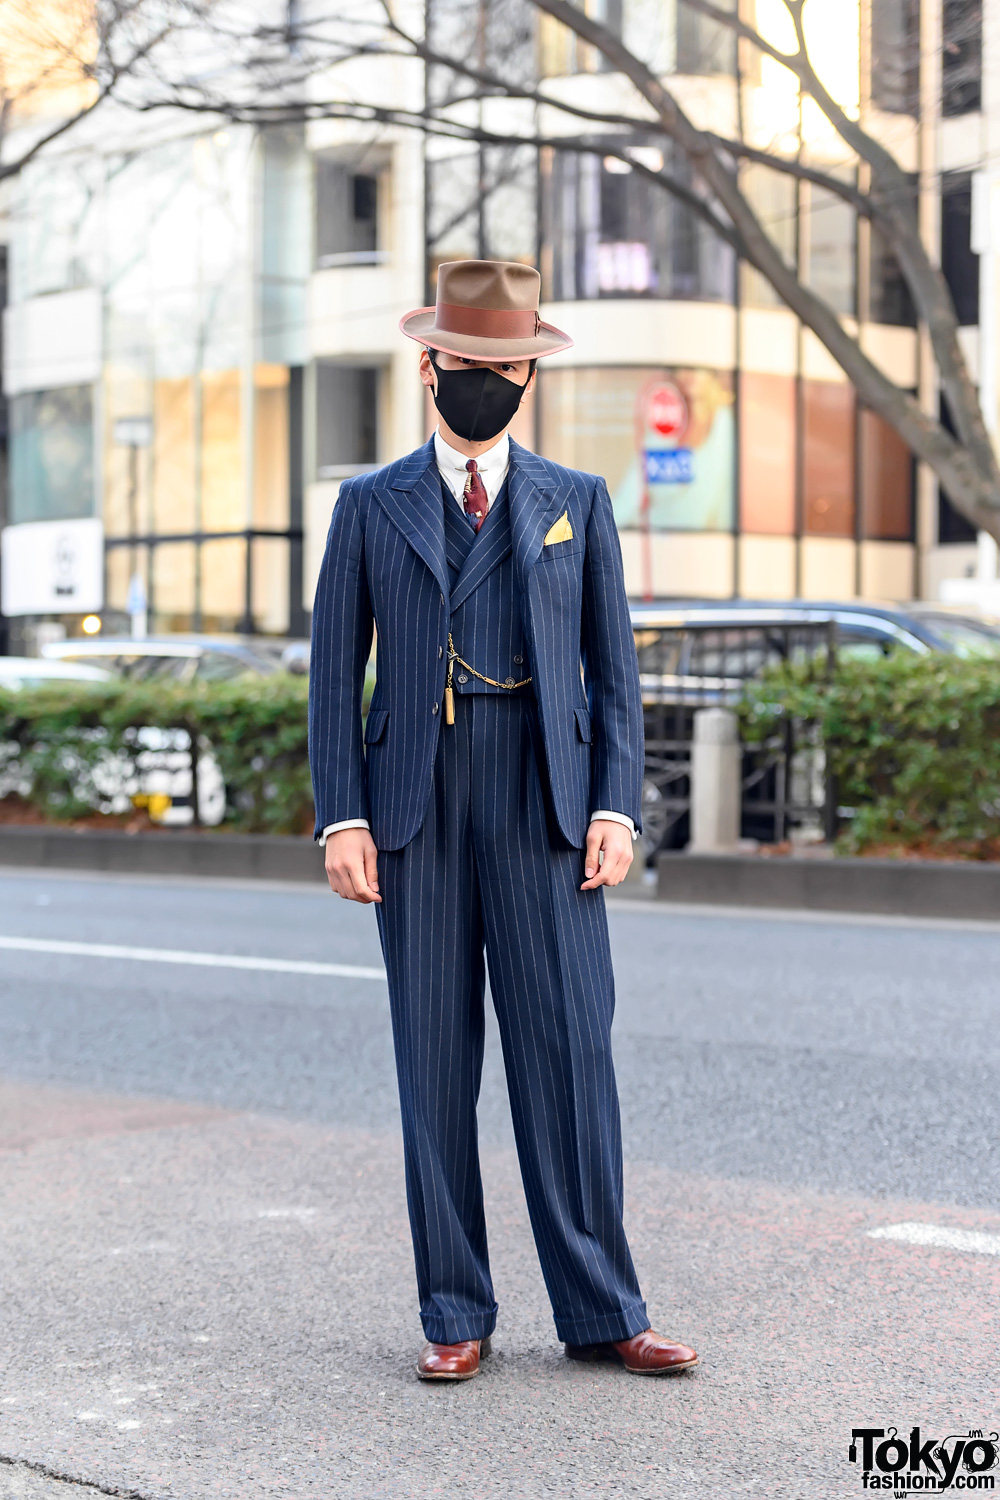 Bespoke 1930s Pinstripe Suit by Old Hat Tokyo, Pocket Watch, and Dress Shoes in Harajuku